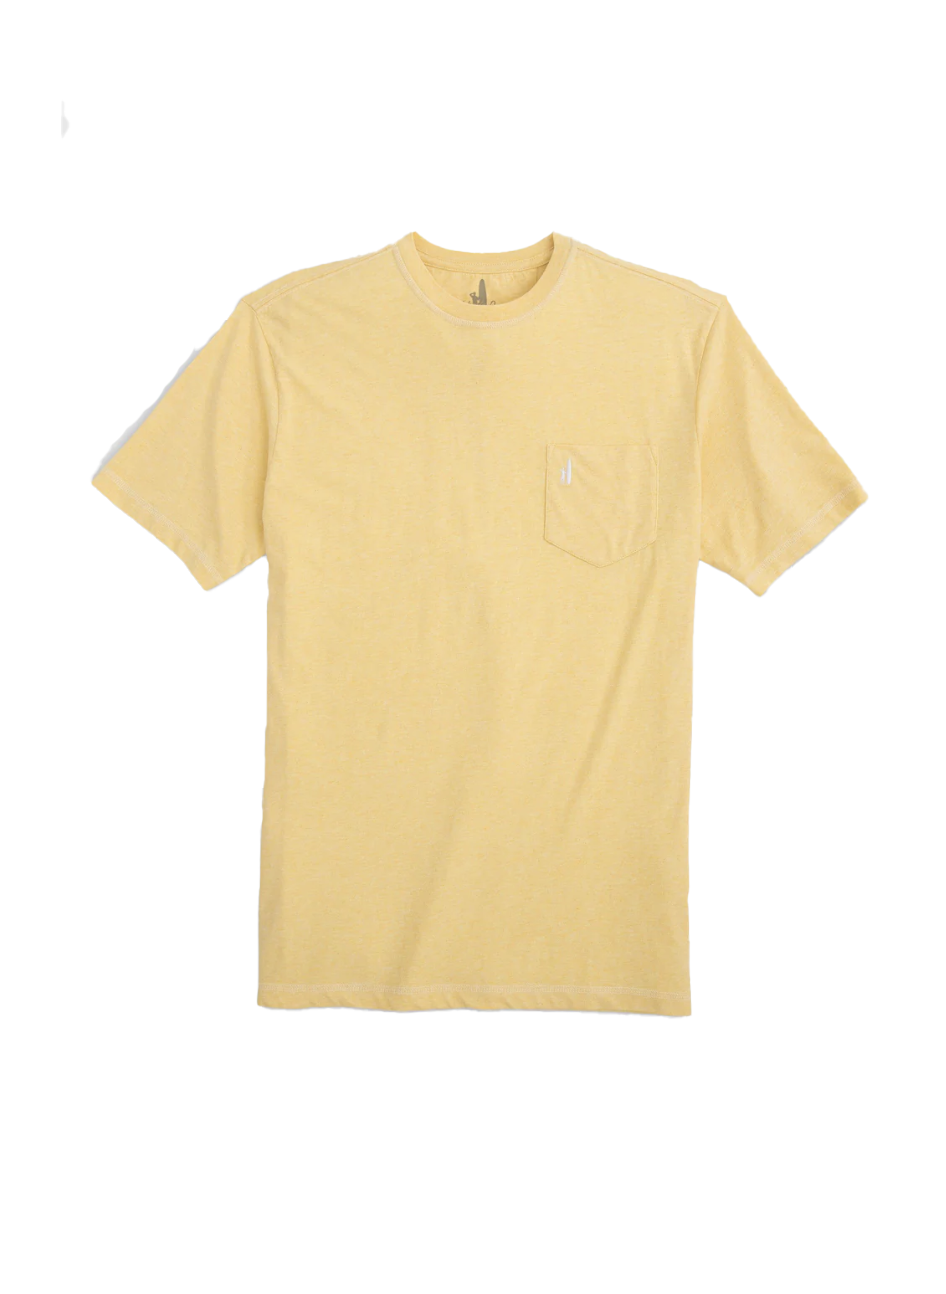 Heathered Dale SS T-Shirt Sunny